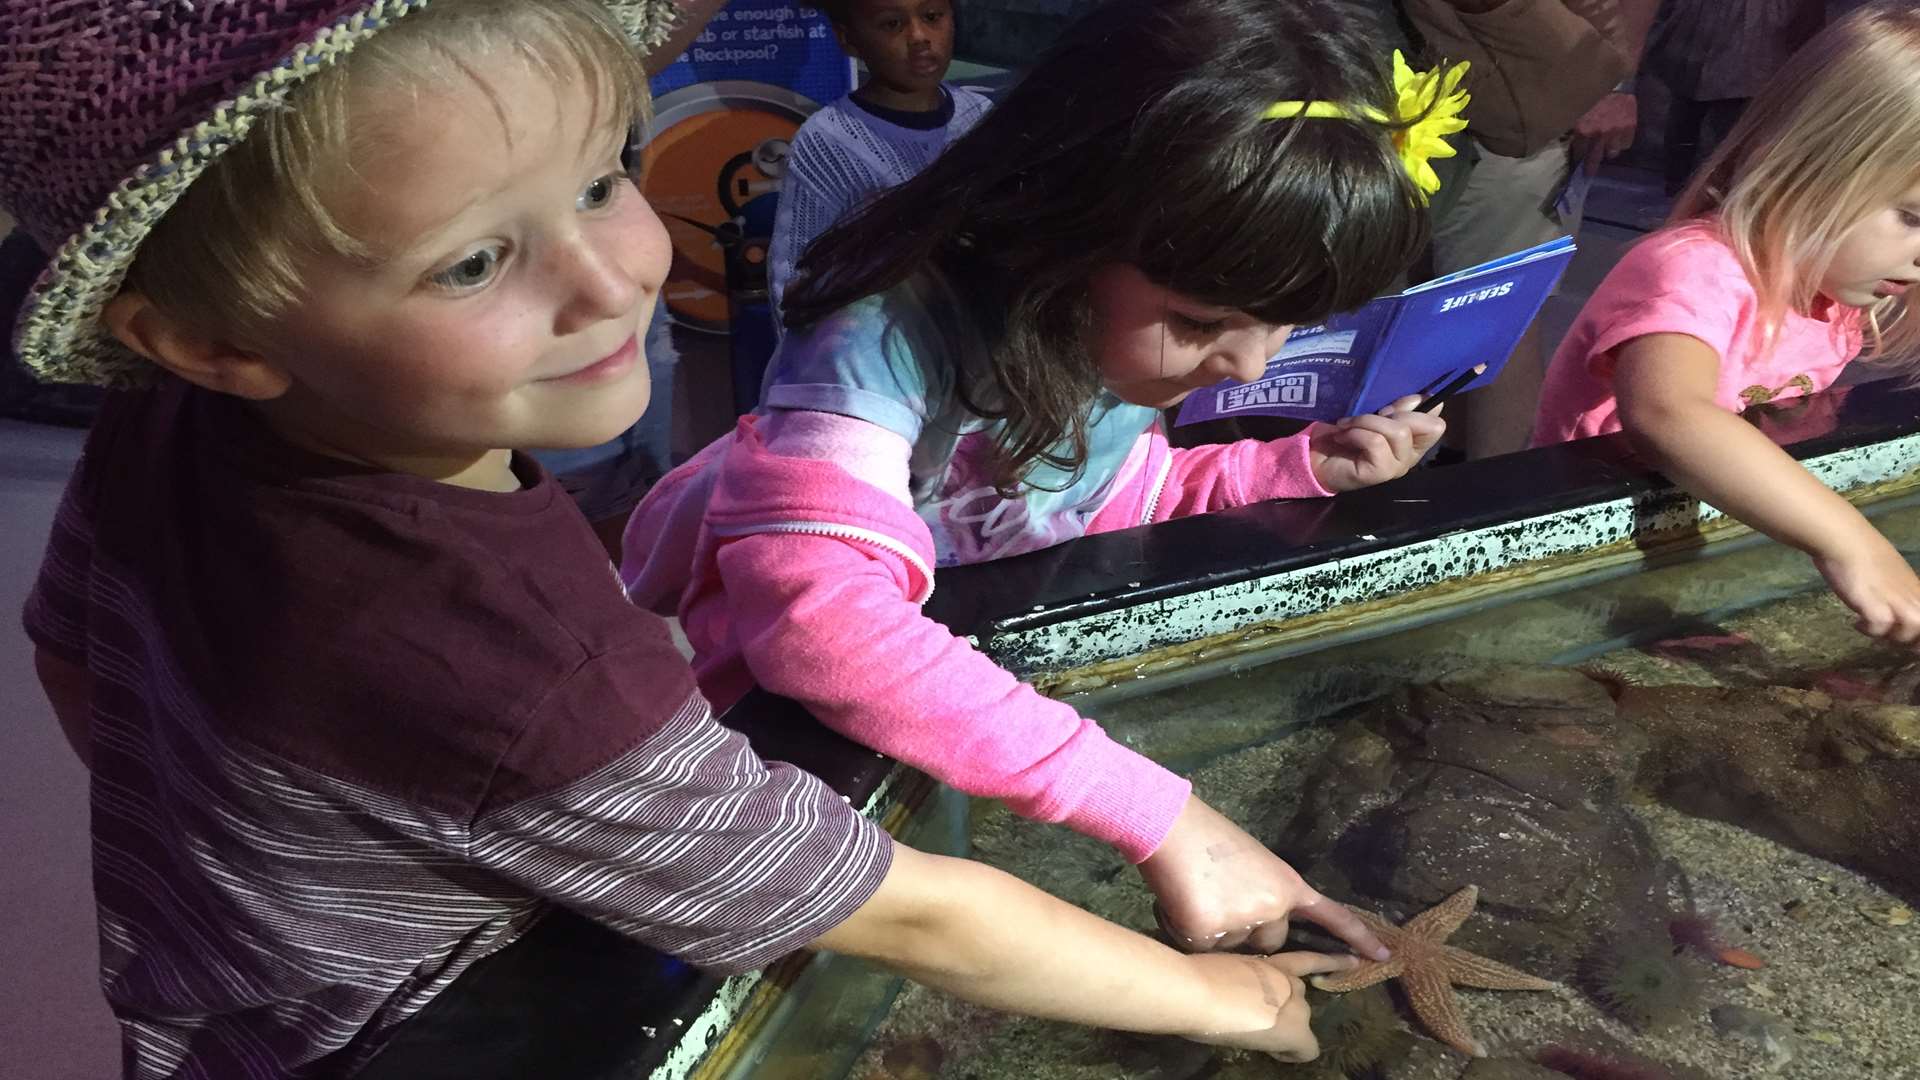 Stroking a starfish was one of the highlights at SEA LIFE Brighton